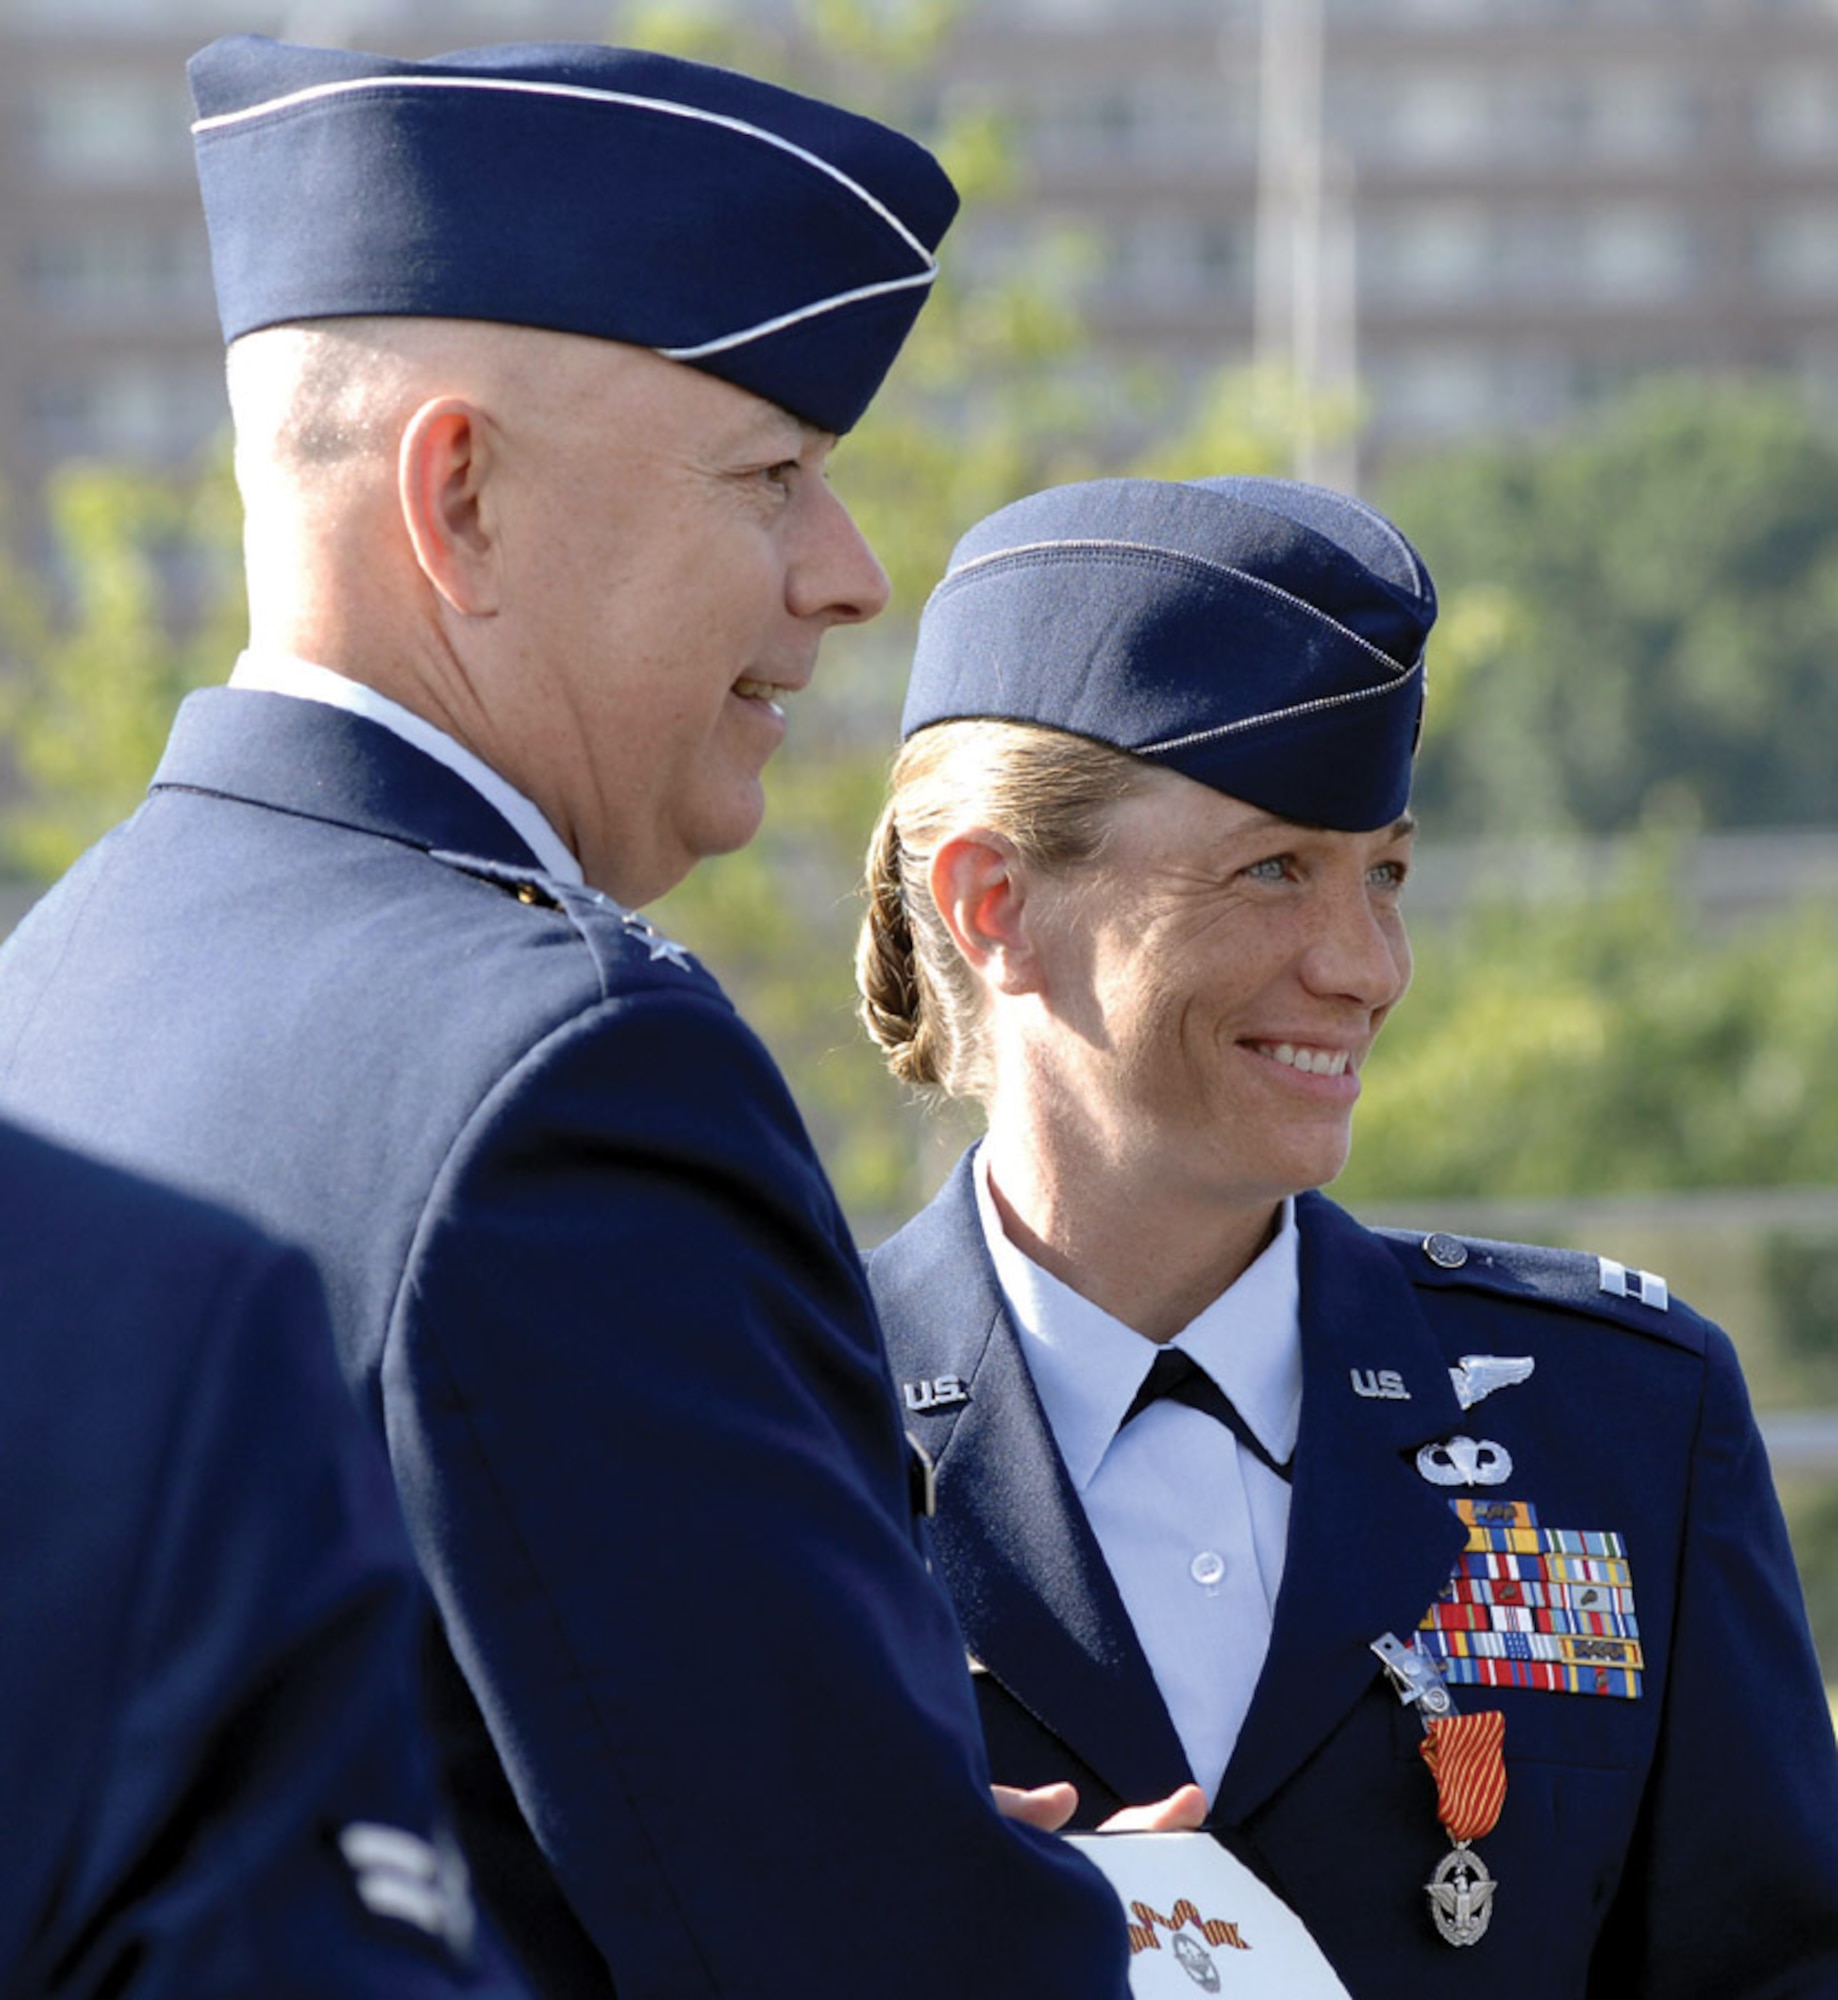 Gen. T. Michael Moseley awards Maj. Allison Black with the new Air Force Combat Action Medal at a ceremony in Washington, D.C., Tuesday. Major Black, 1st Special Operations Group, was one of six Airmen from the entire Air Force selected to participate in the historic ceremony. (U.S. Air Force photo by Ilene Allen)